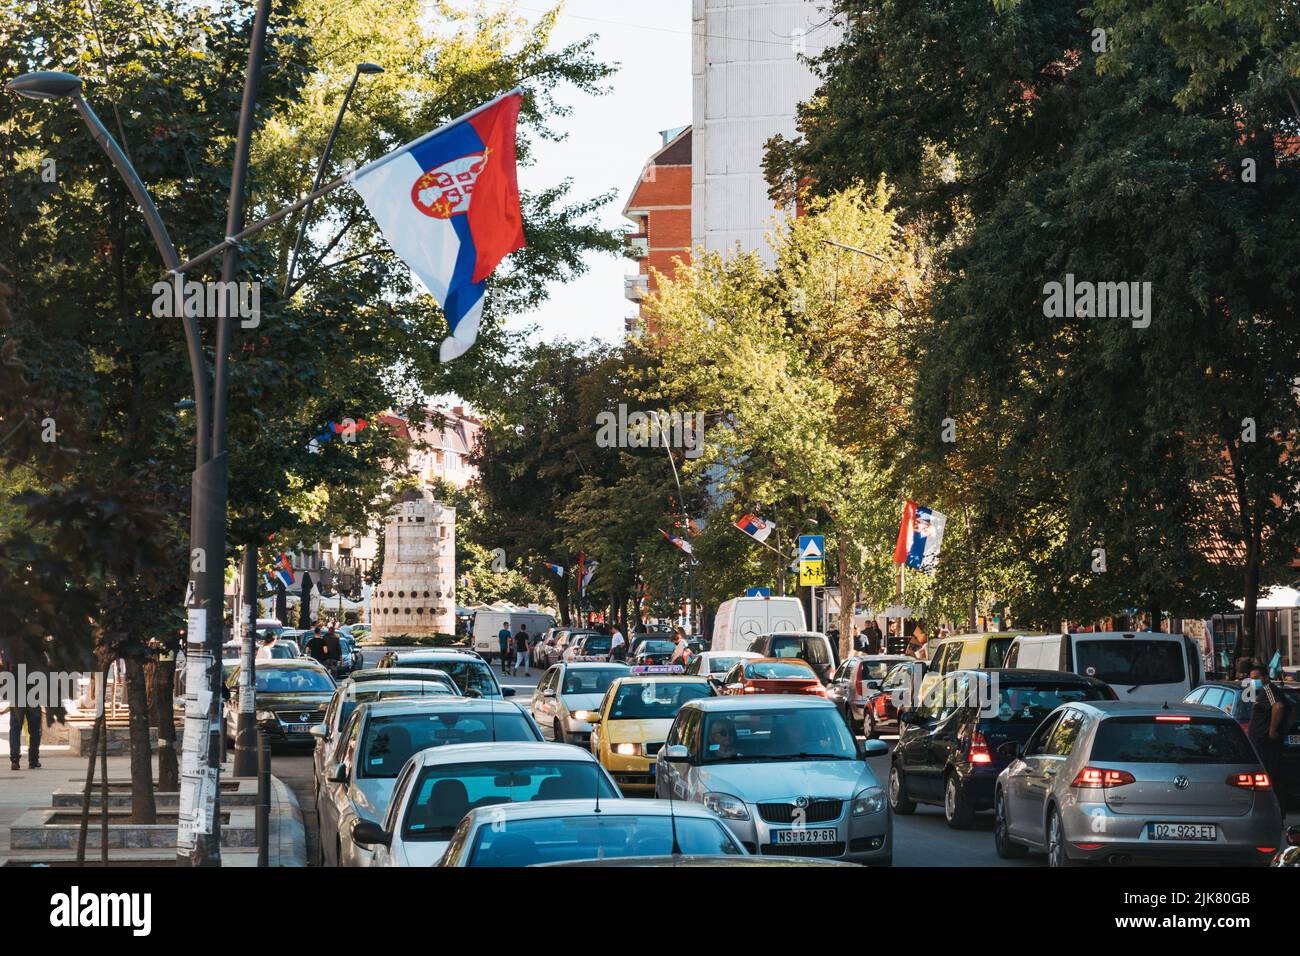 Serbian flags fly in the streets of North Kosovska Mitrovica, a Serbian enclave in the northern city of Mitrovica, Kosovo Stock Photo